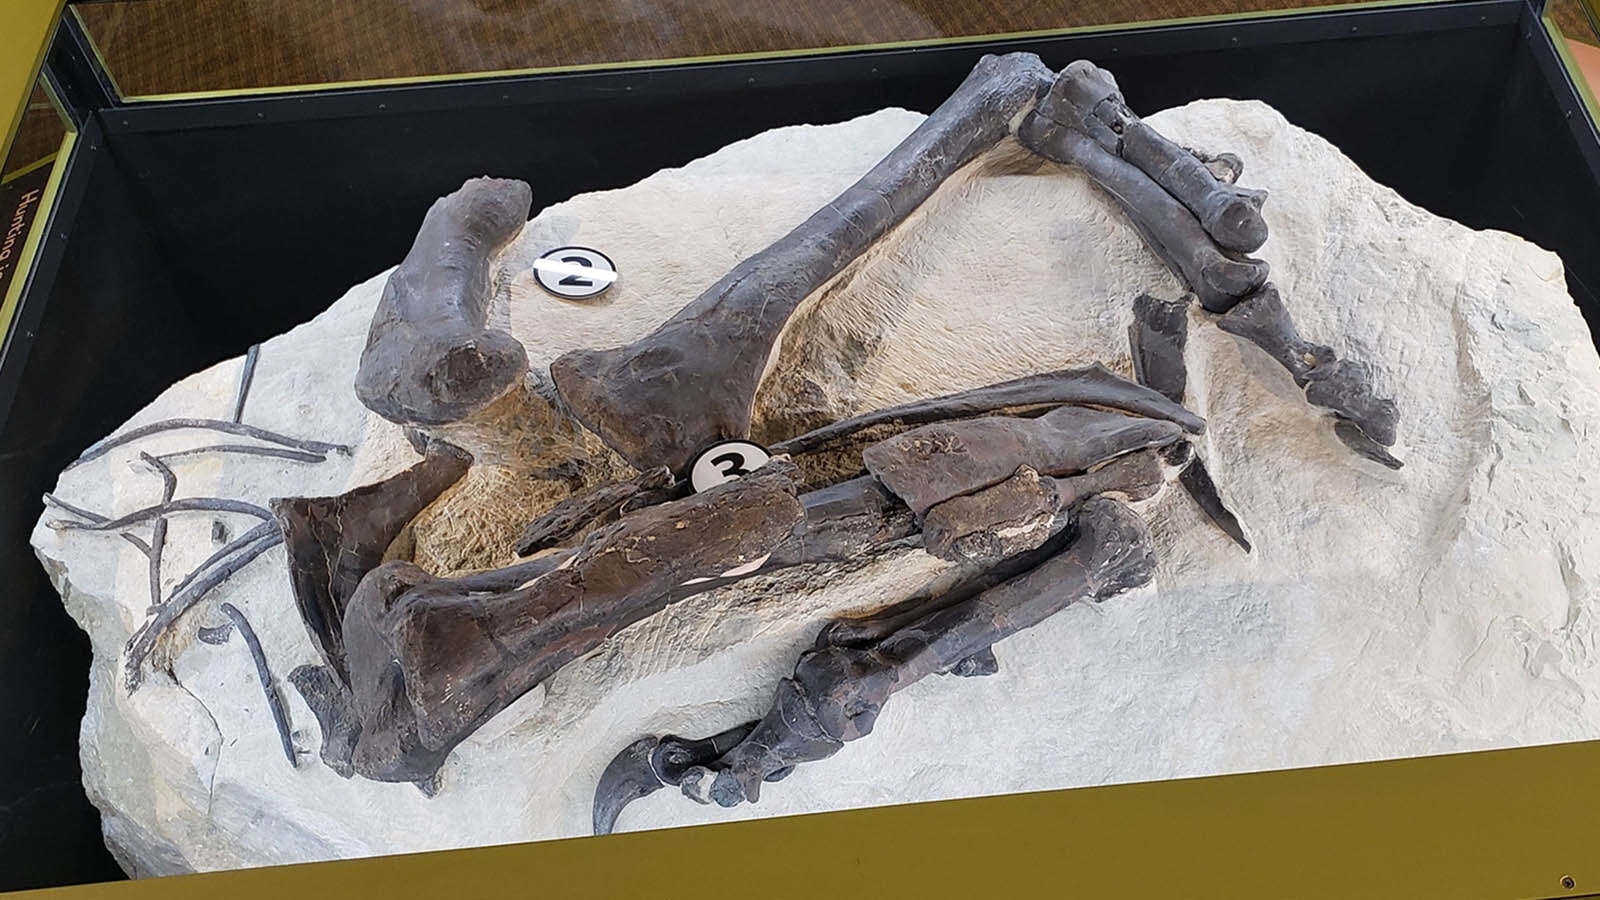 The legs of an Allosaurus found in Wyoming's Jurassic Mile are on display at The Children's Museum of Indianapolis.